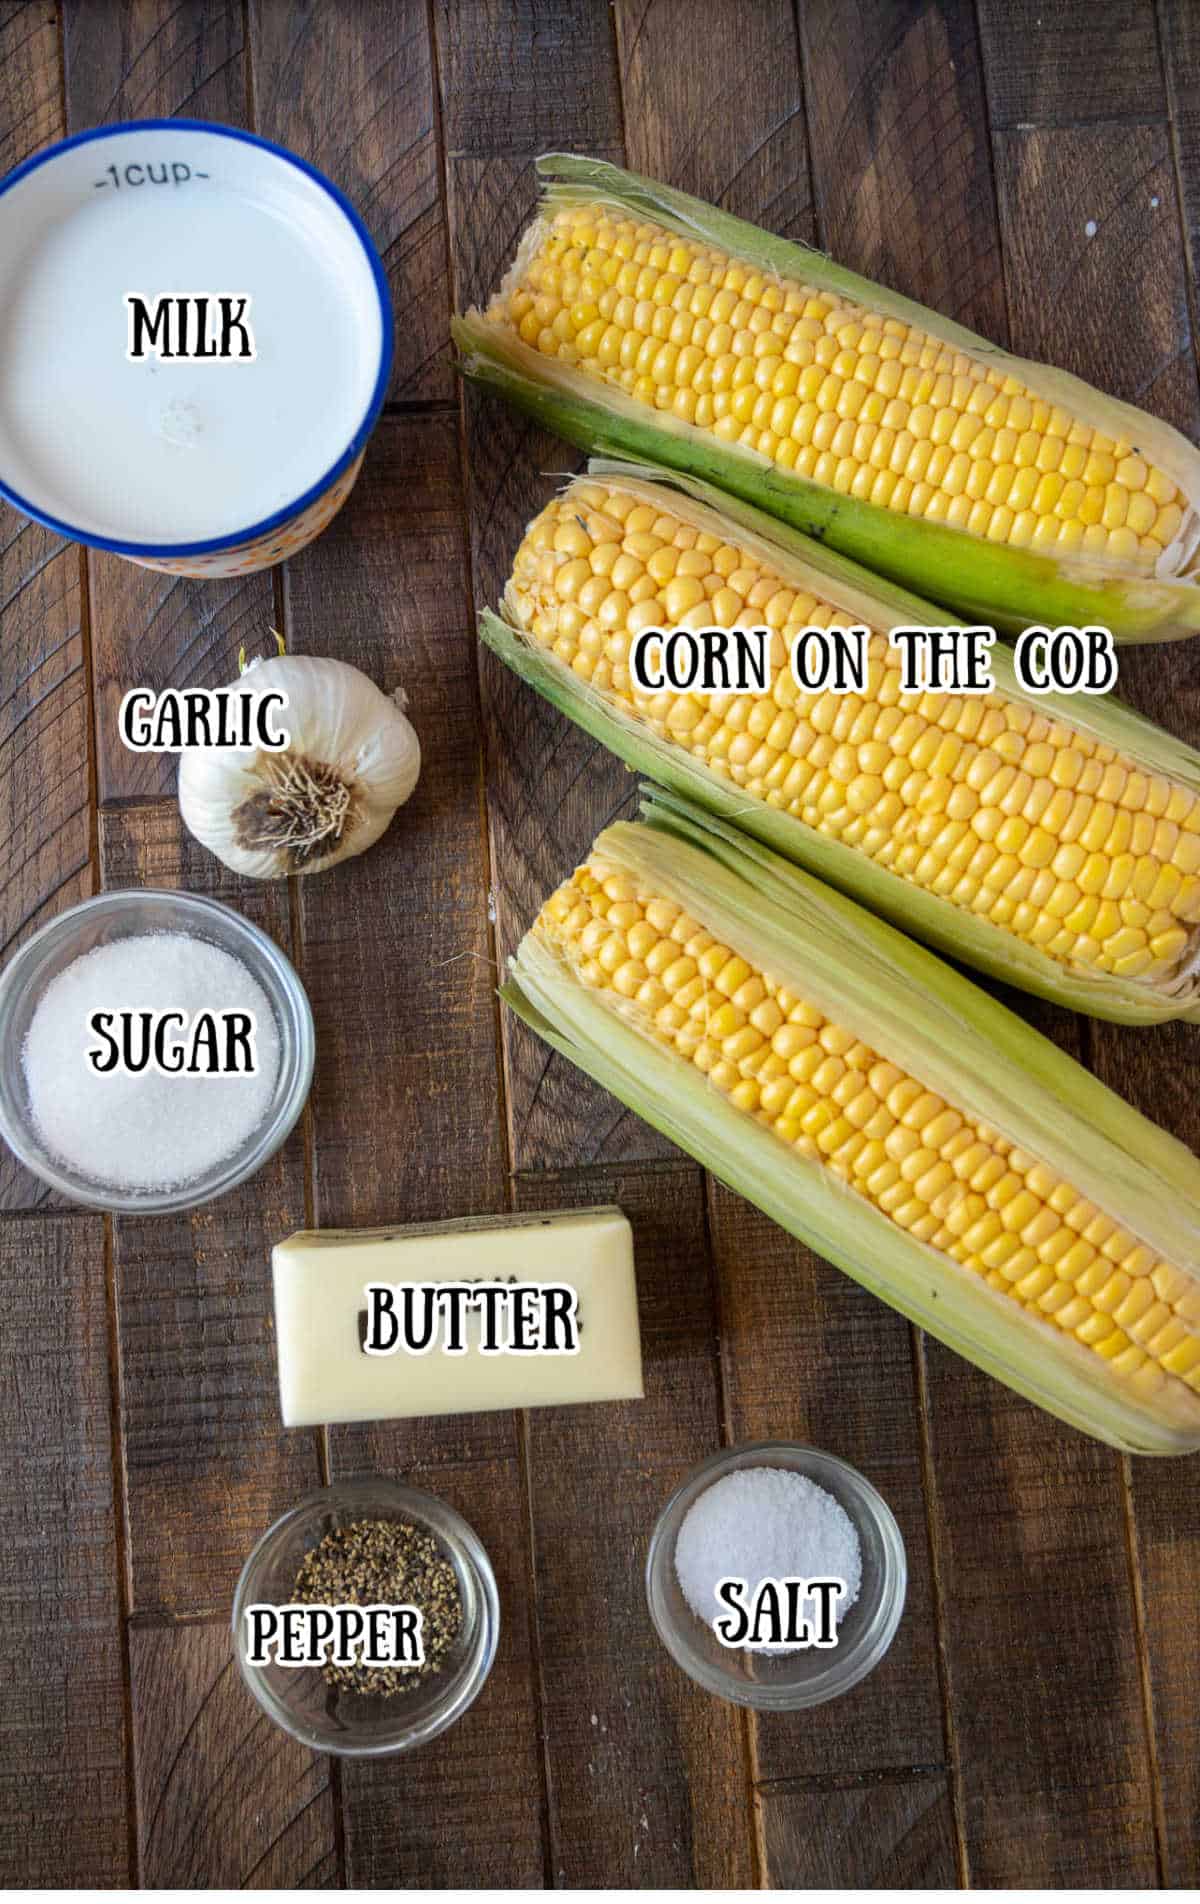 All the ingredients needed for milk boiled corn on the cob.